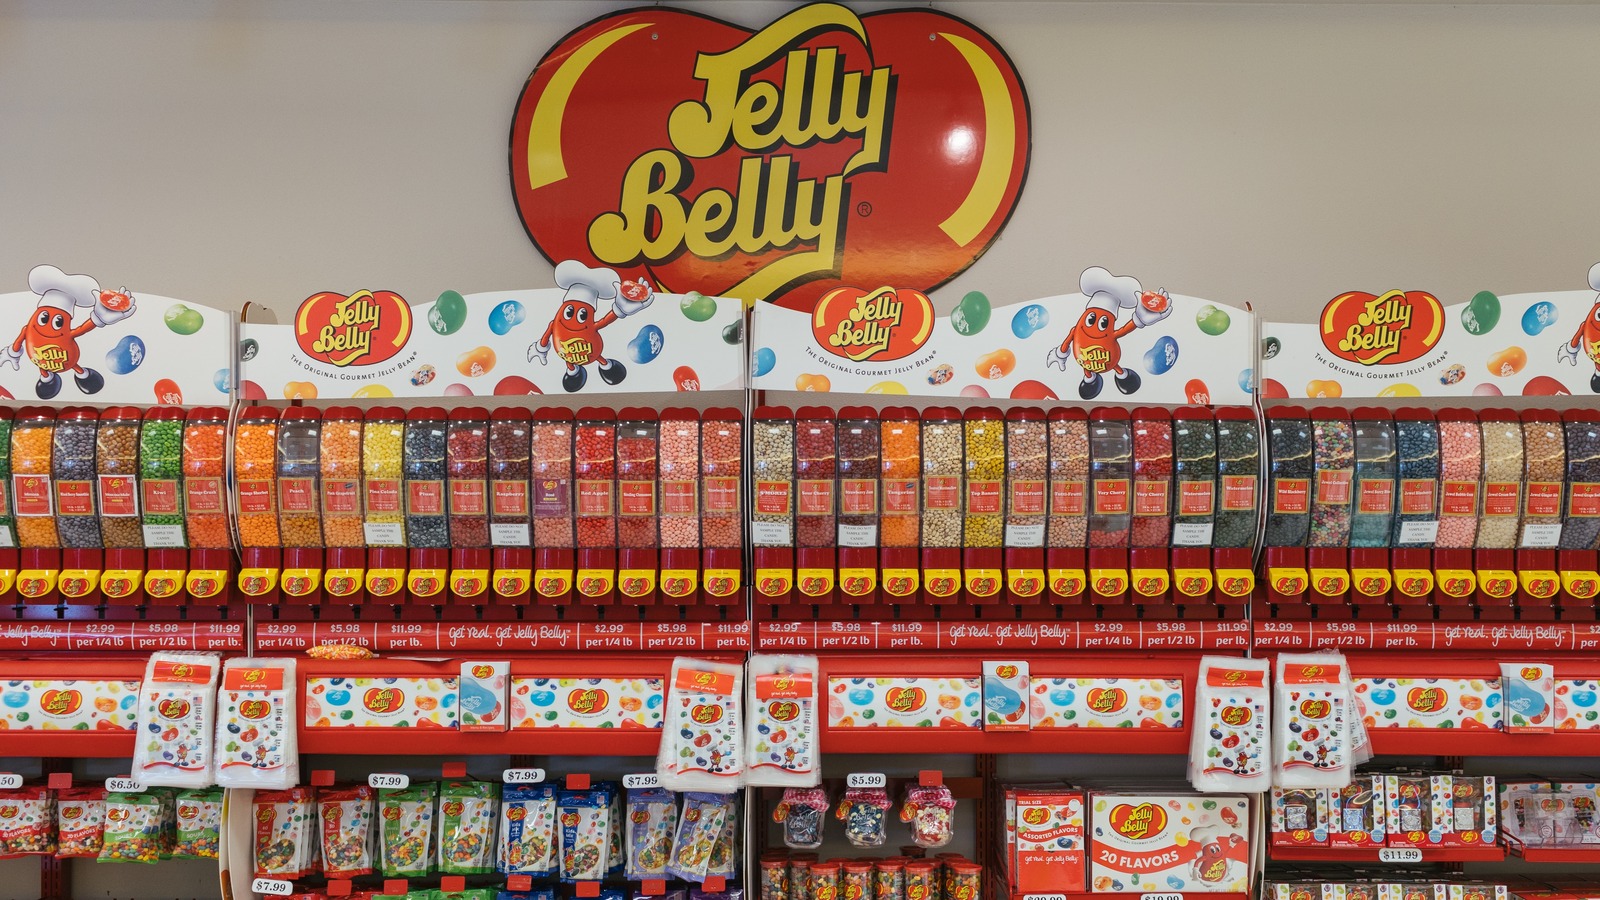 Signature Jelly Belly Jelly Beans, 4-Pound